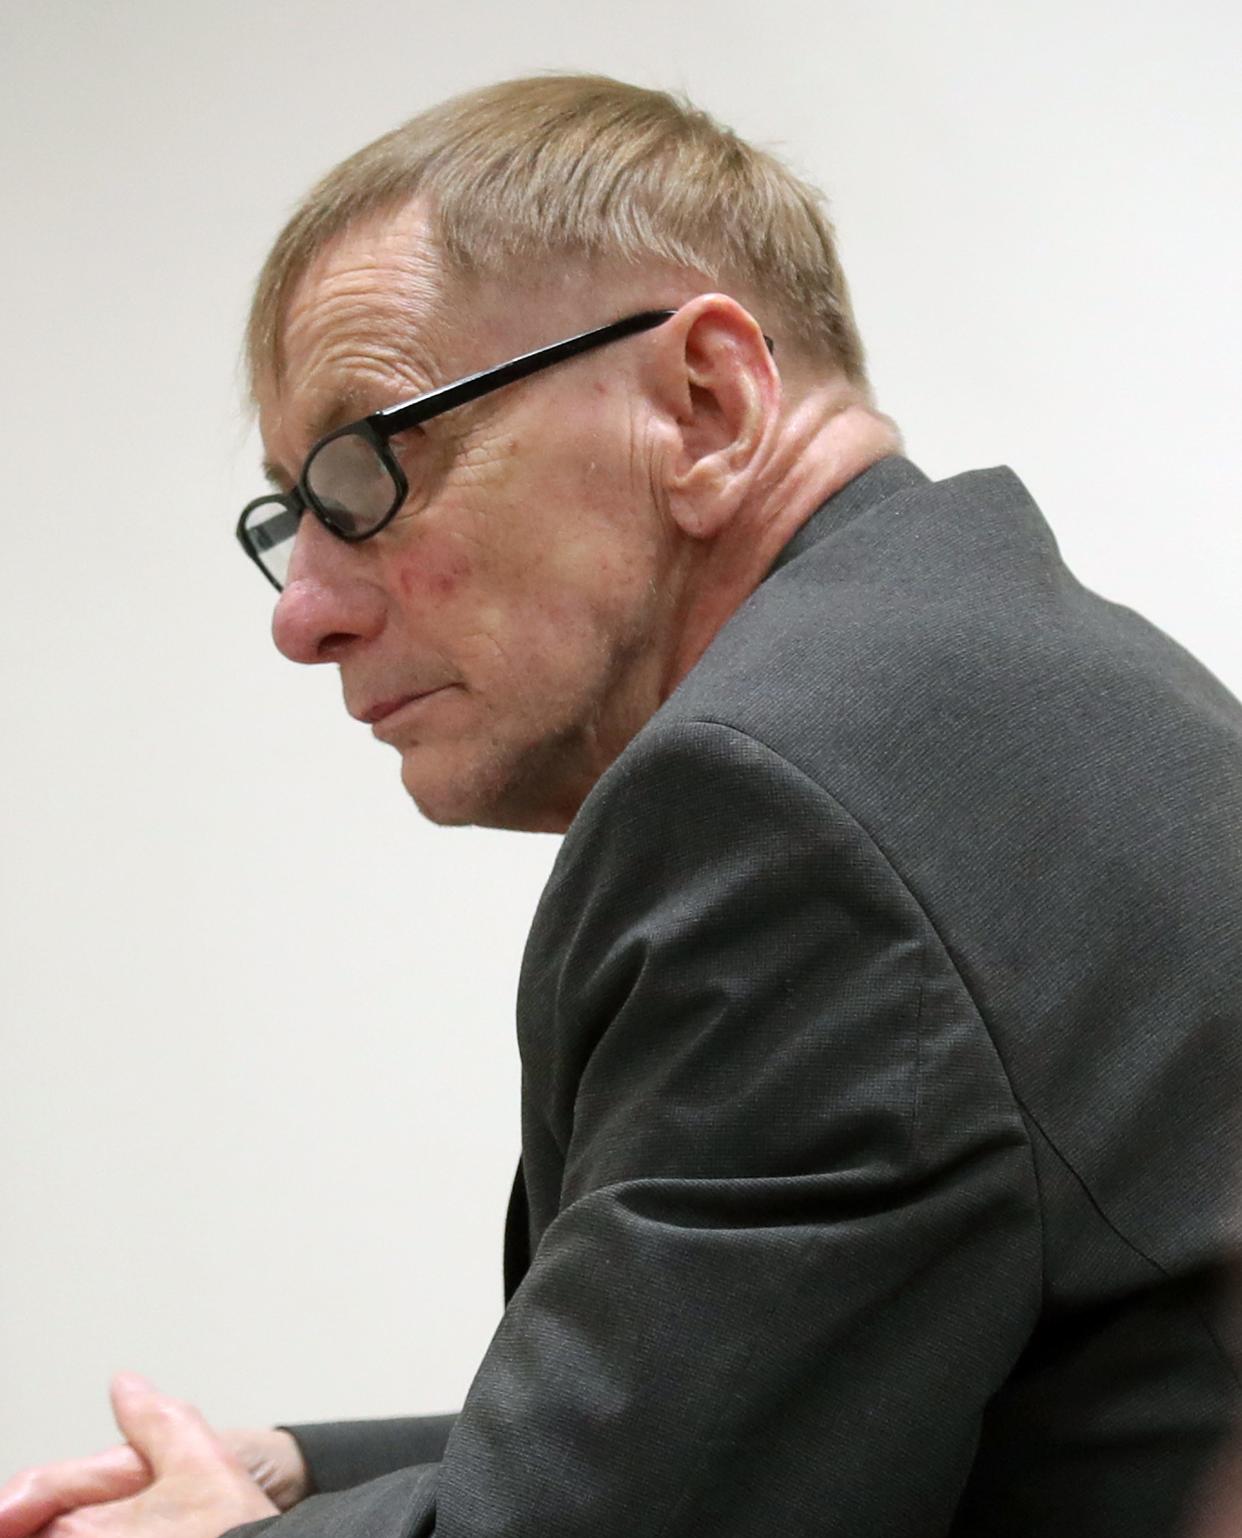 Gene Meyer, 68, listens as his trial begins regarding charges of first-degree murder and first-degree sexual assault with use of a dangerous weapon in Outagamie County Circuit Court on Tuesday in Appleton. Meyer is charged in the death of 60-year-old Betty Rolf in 1988.